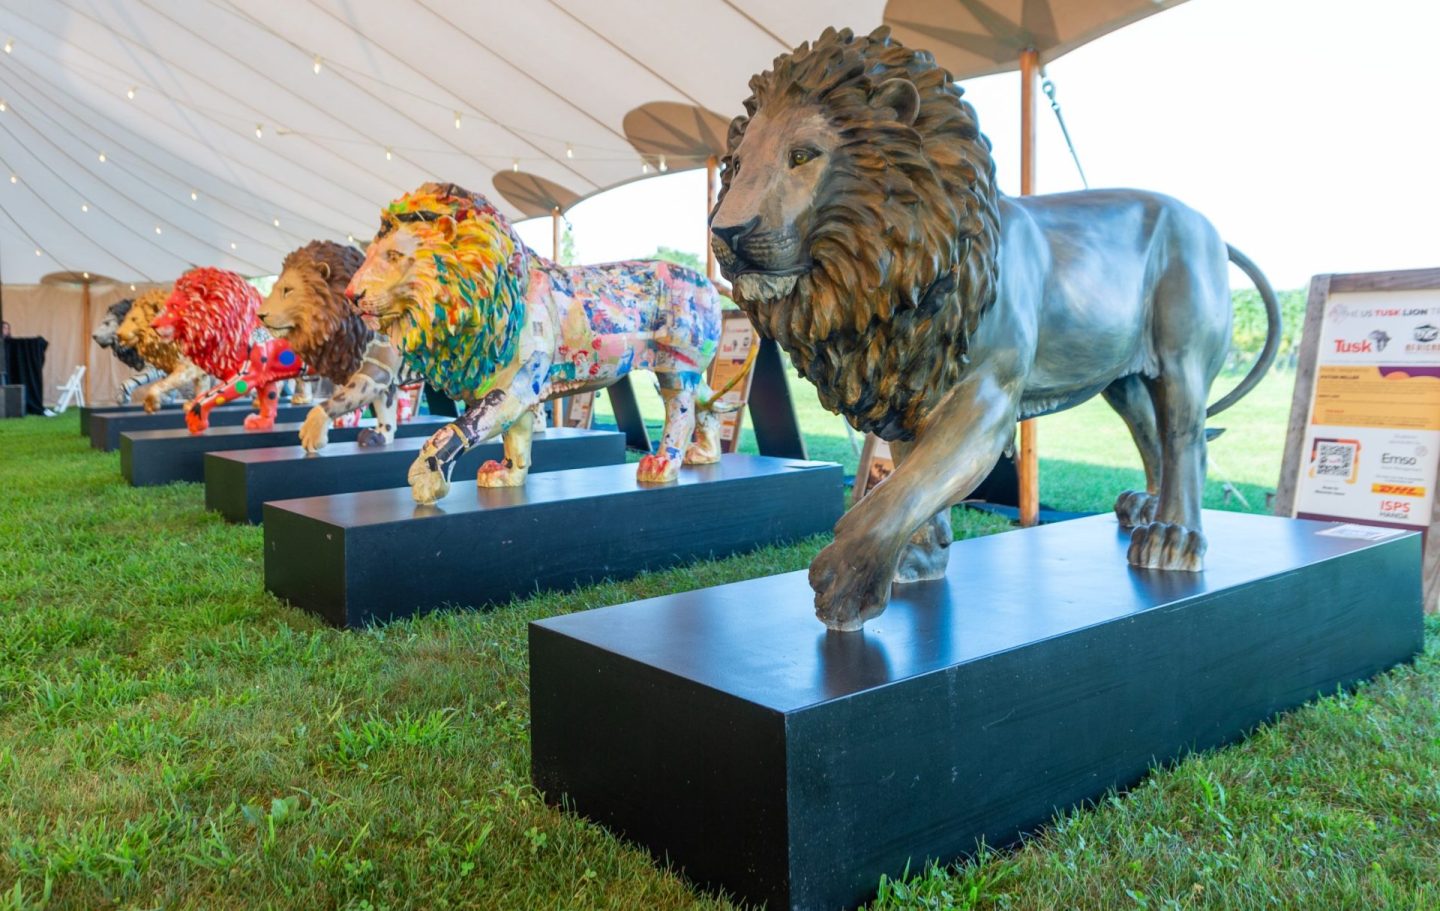 Tusk-ACCF Lion Trail – The Hamptons Lion Soireé at Wölffer Estate on August 27, 2021 in Sagaponack, NY. (Photo by Mark Sagliocco/PMC) 